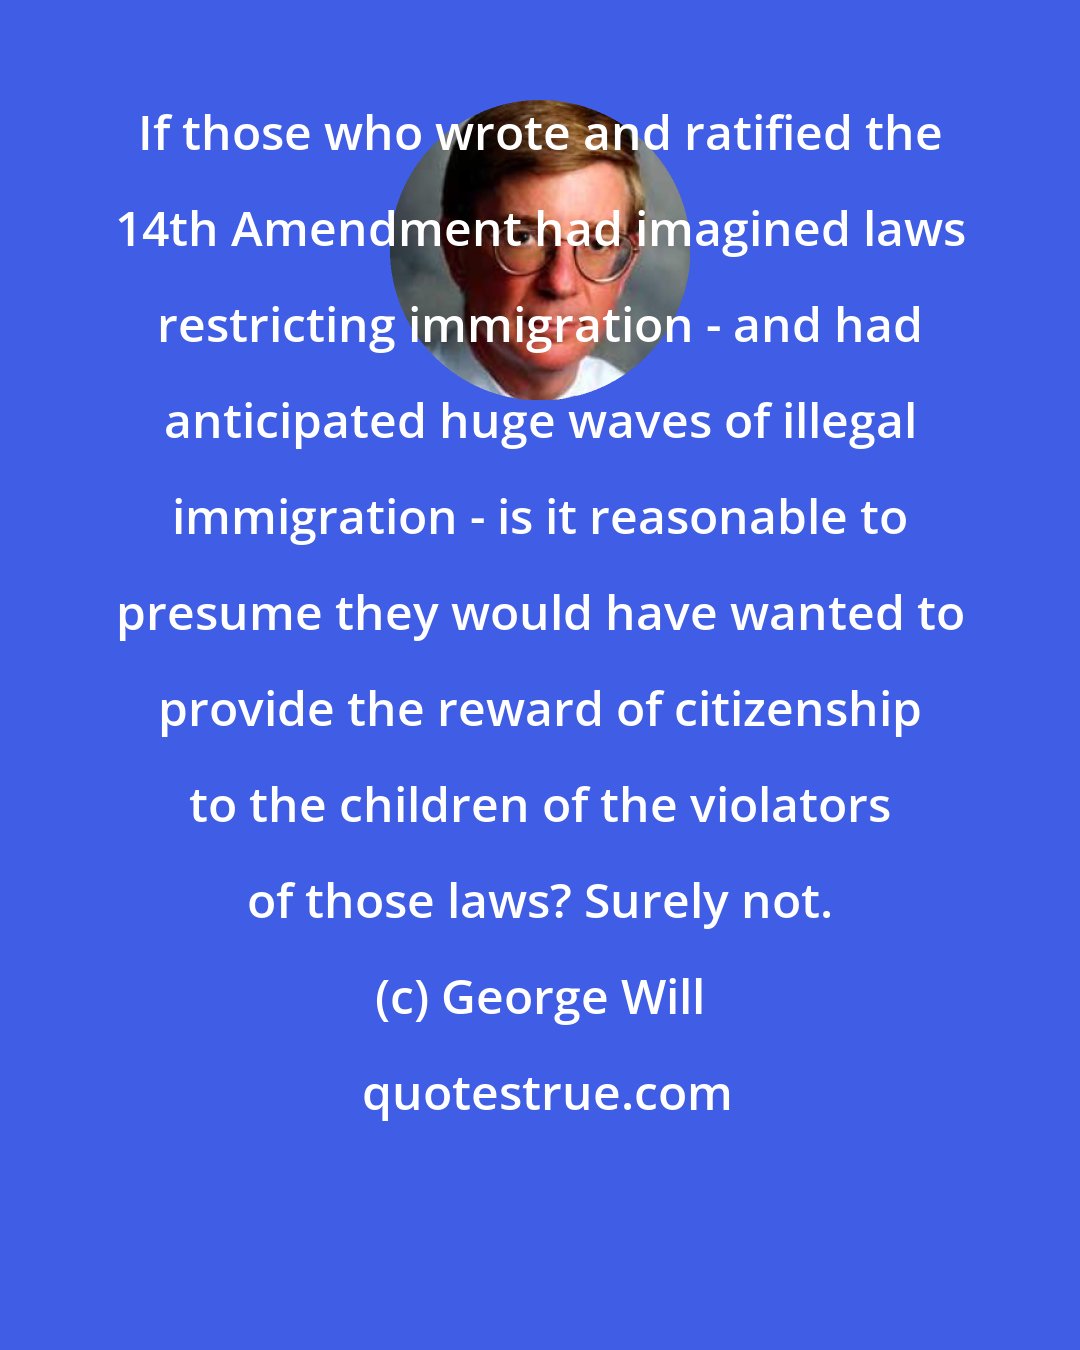 George Will: If those who wrote and ratified the 14th Amendment had imagined laws restricting immigration - and had anticipated huge waves of illegal immigration - is it reasonable to presume they would have wanted to provide the reward of citizenship to the children of the violators of those laws? Surely not.